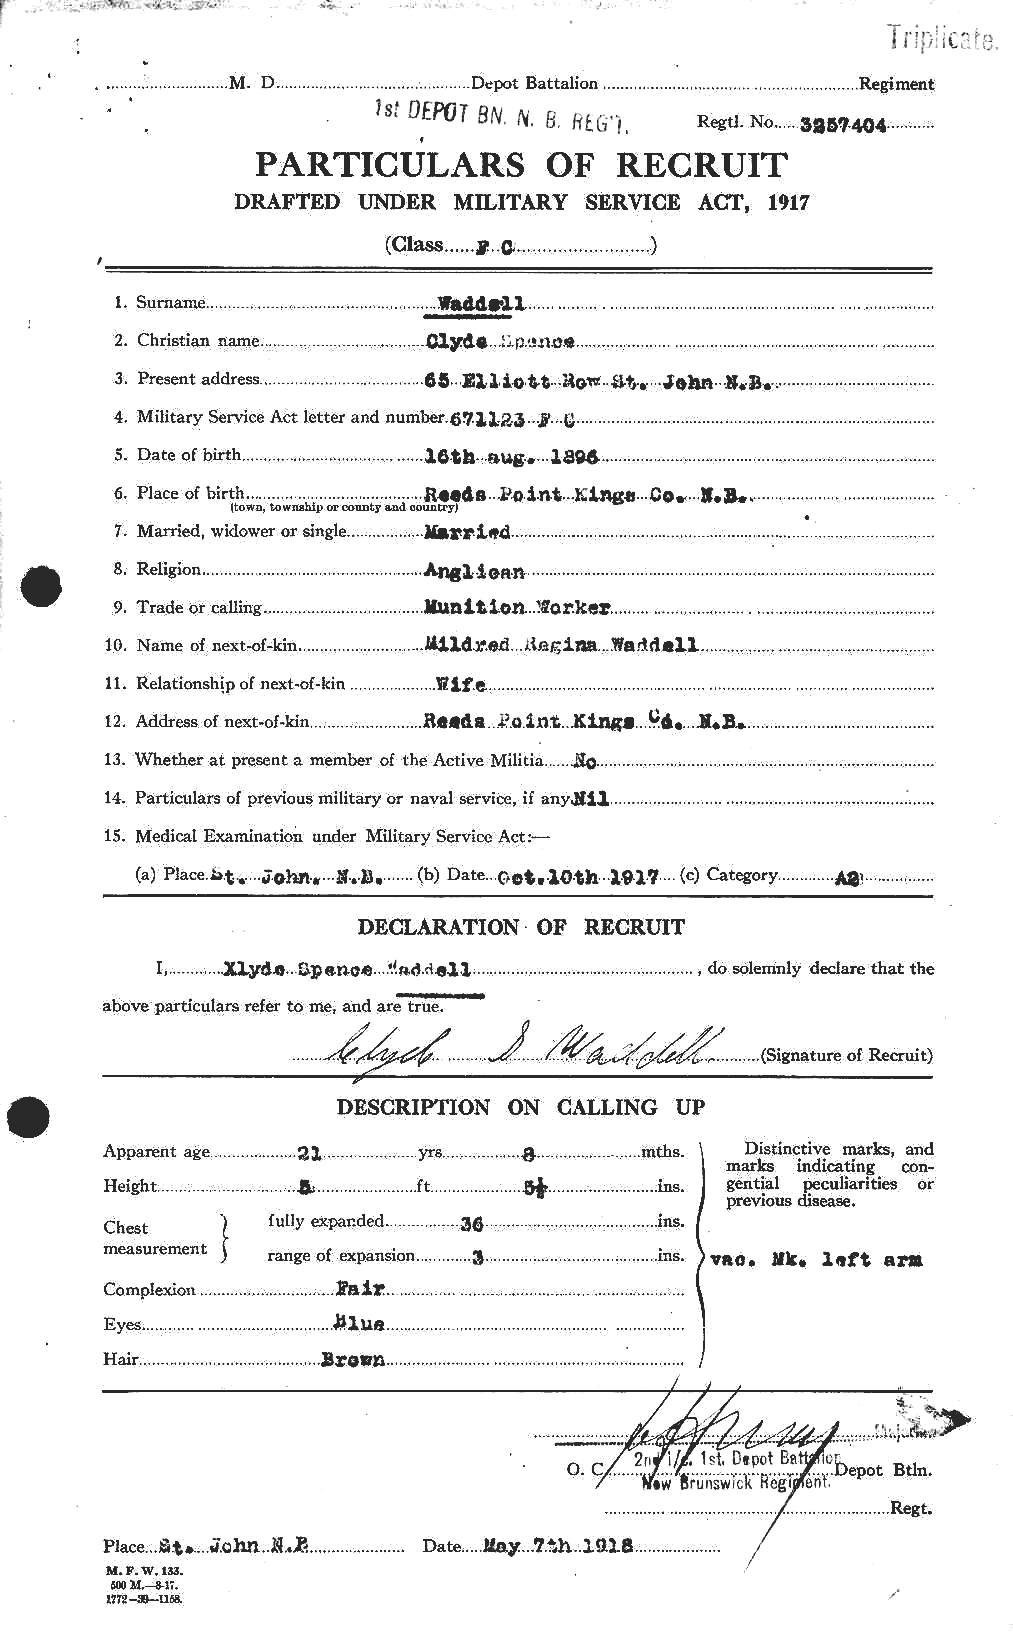 Personnel Records of the First World War - CEF 649824a